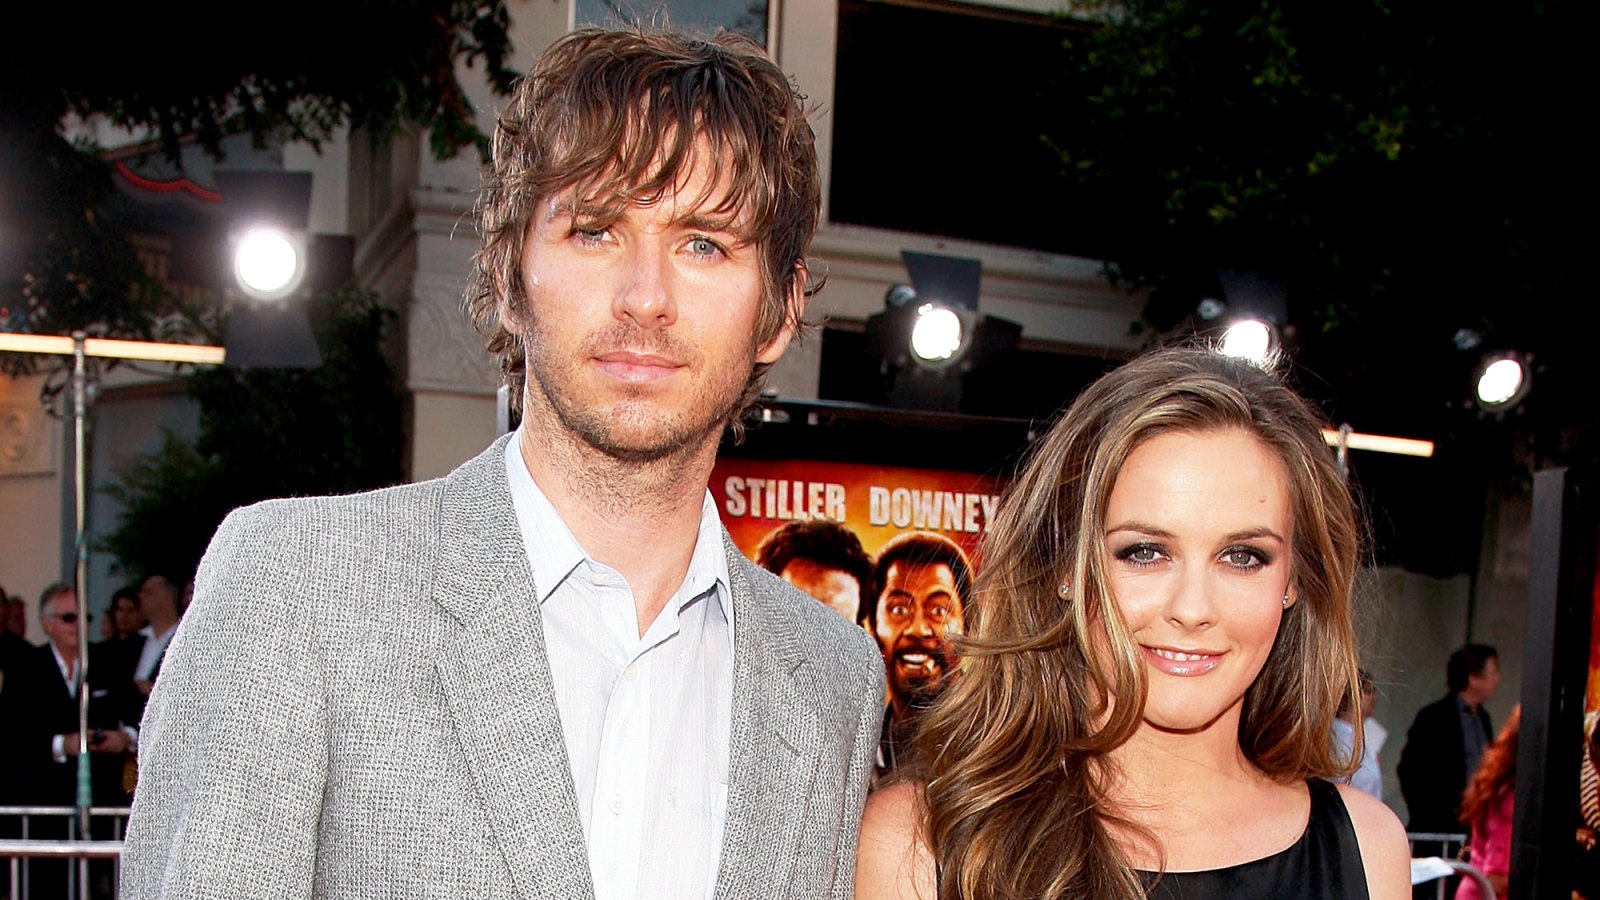 Christopher Jarecki and Alicia Silverstone arrive at the 2008 Los Angeles Premiere of "Tropic Thunder" at the Mann's Village Theater in Los Angeles, California.